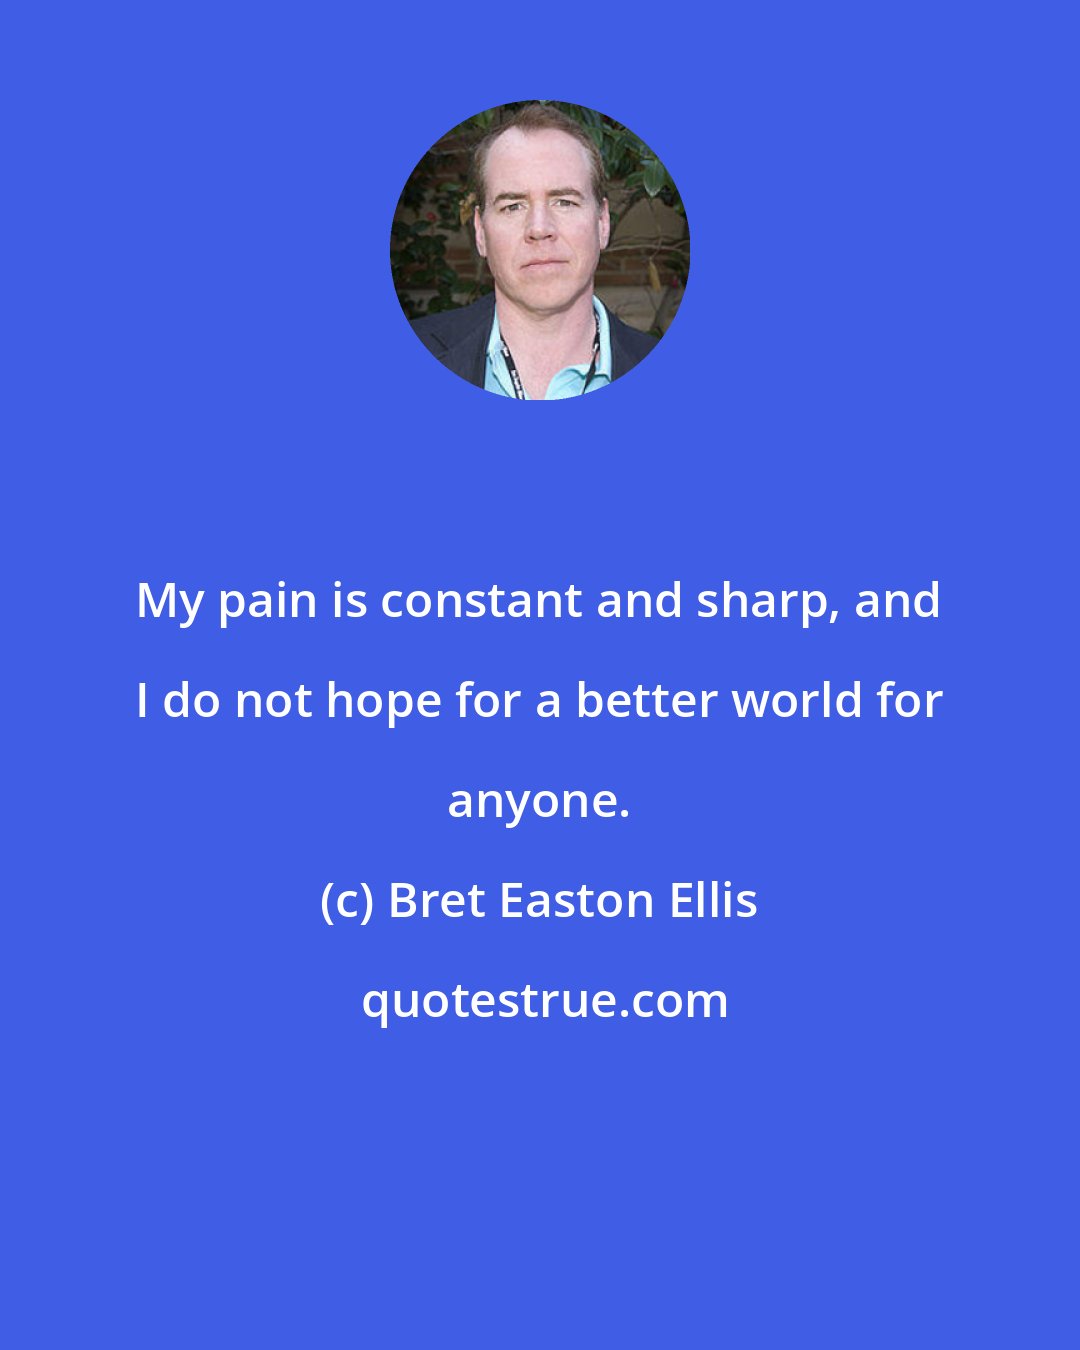 Bret Easton Ellis: My pain is constant and sharp, and I do not hope for a better world for anyone.